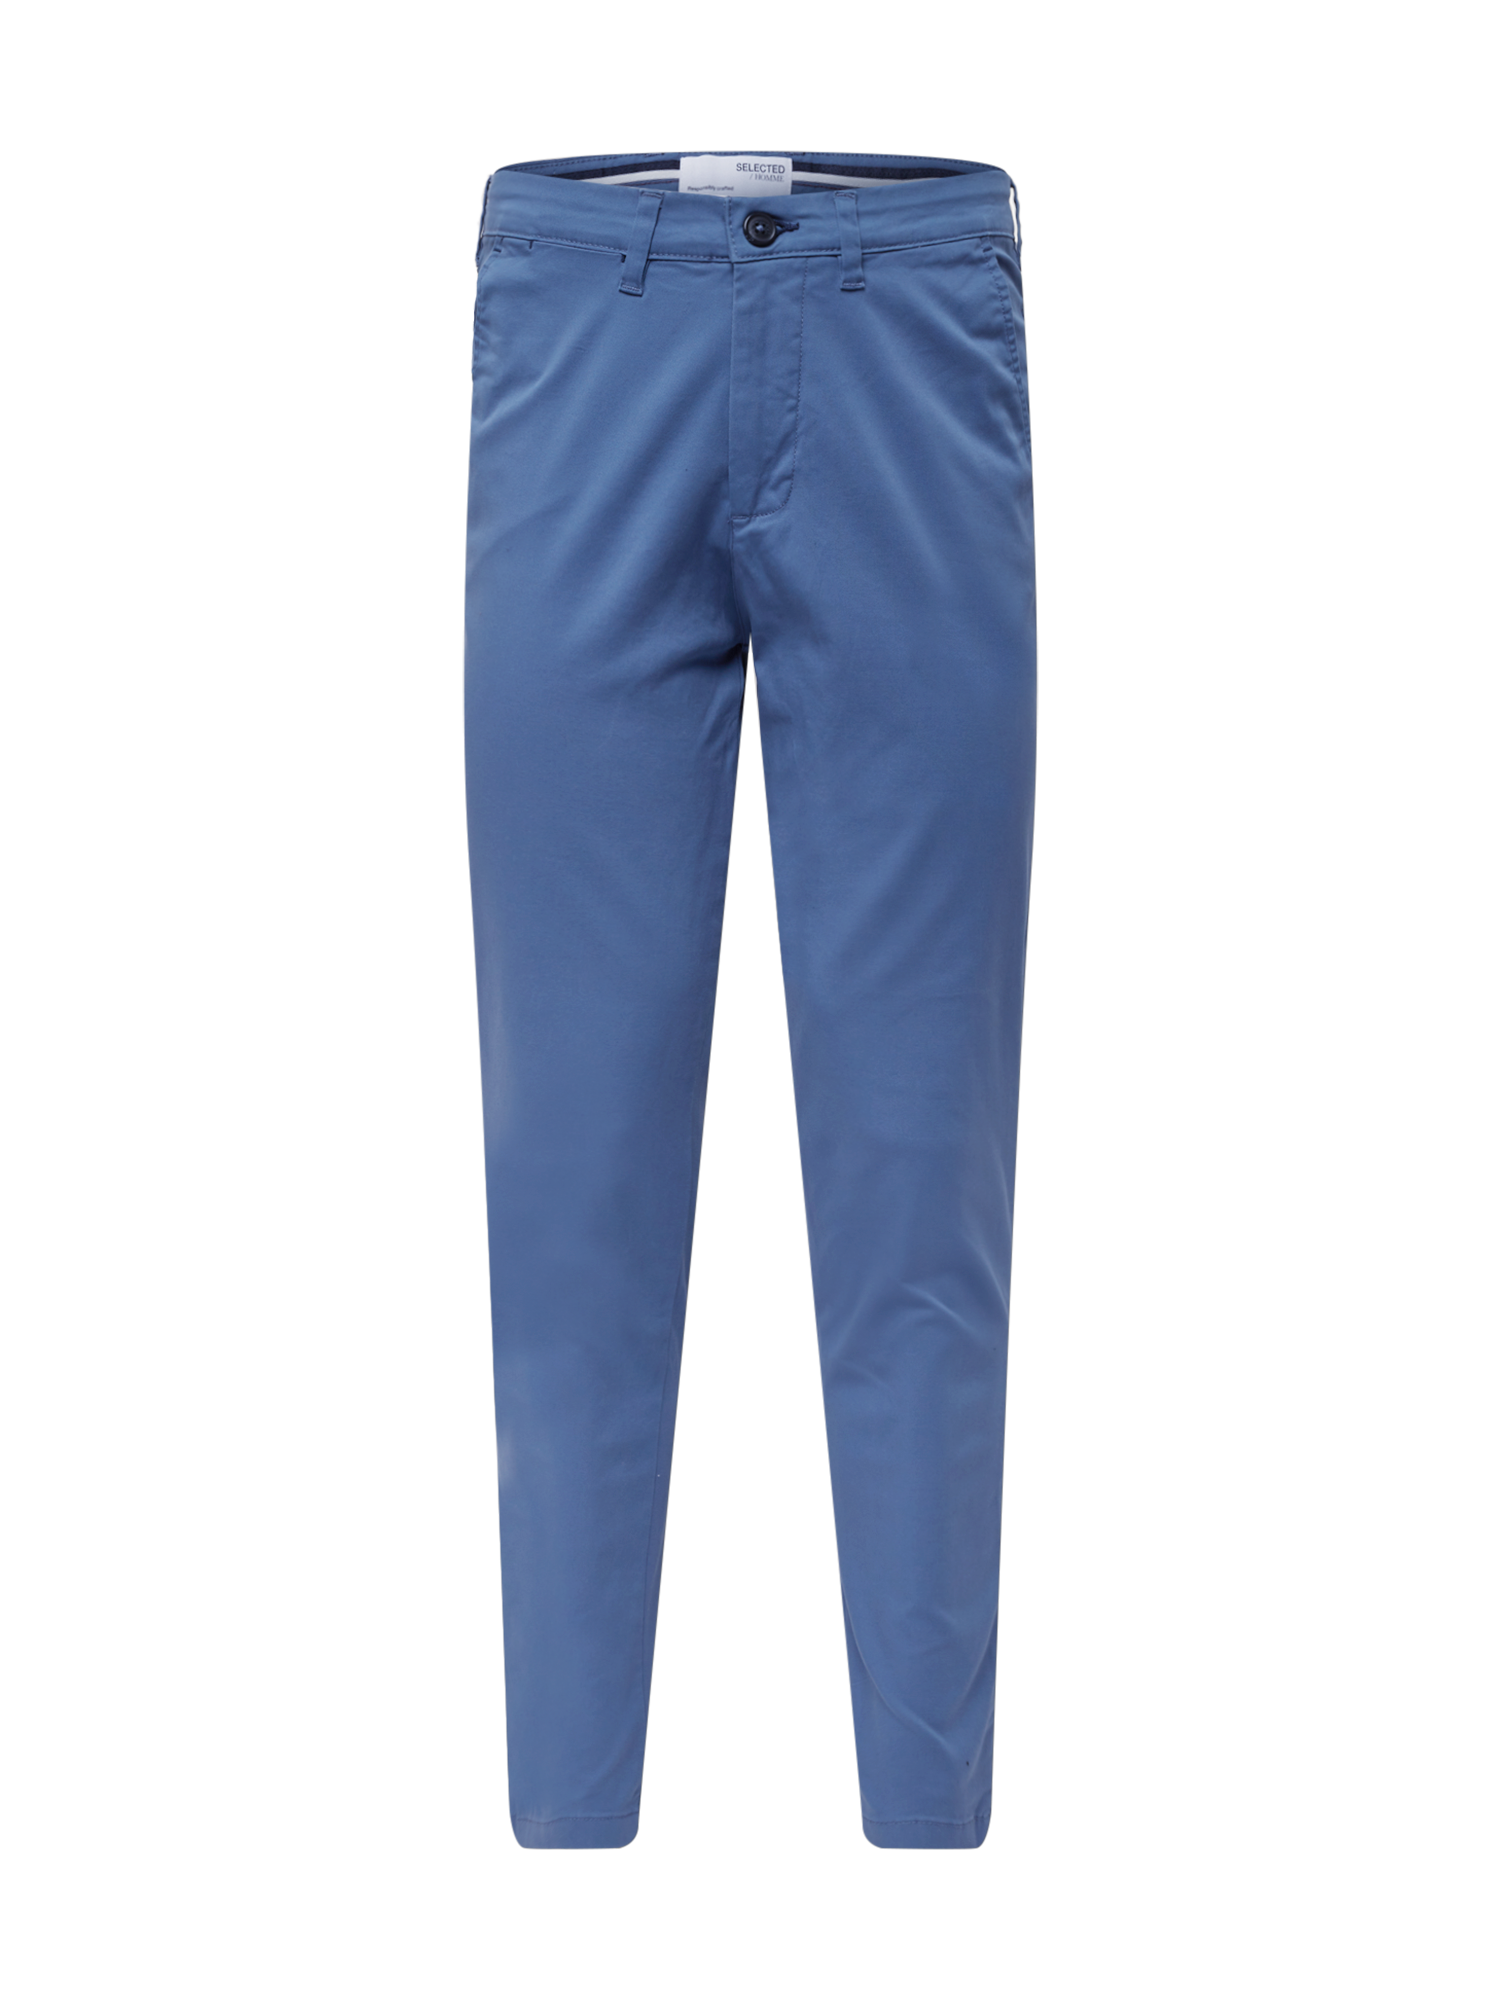 Occasioni 9lzfg SELECTED HOMME Pantaloni chino Miles in Blu Reale 